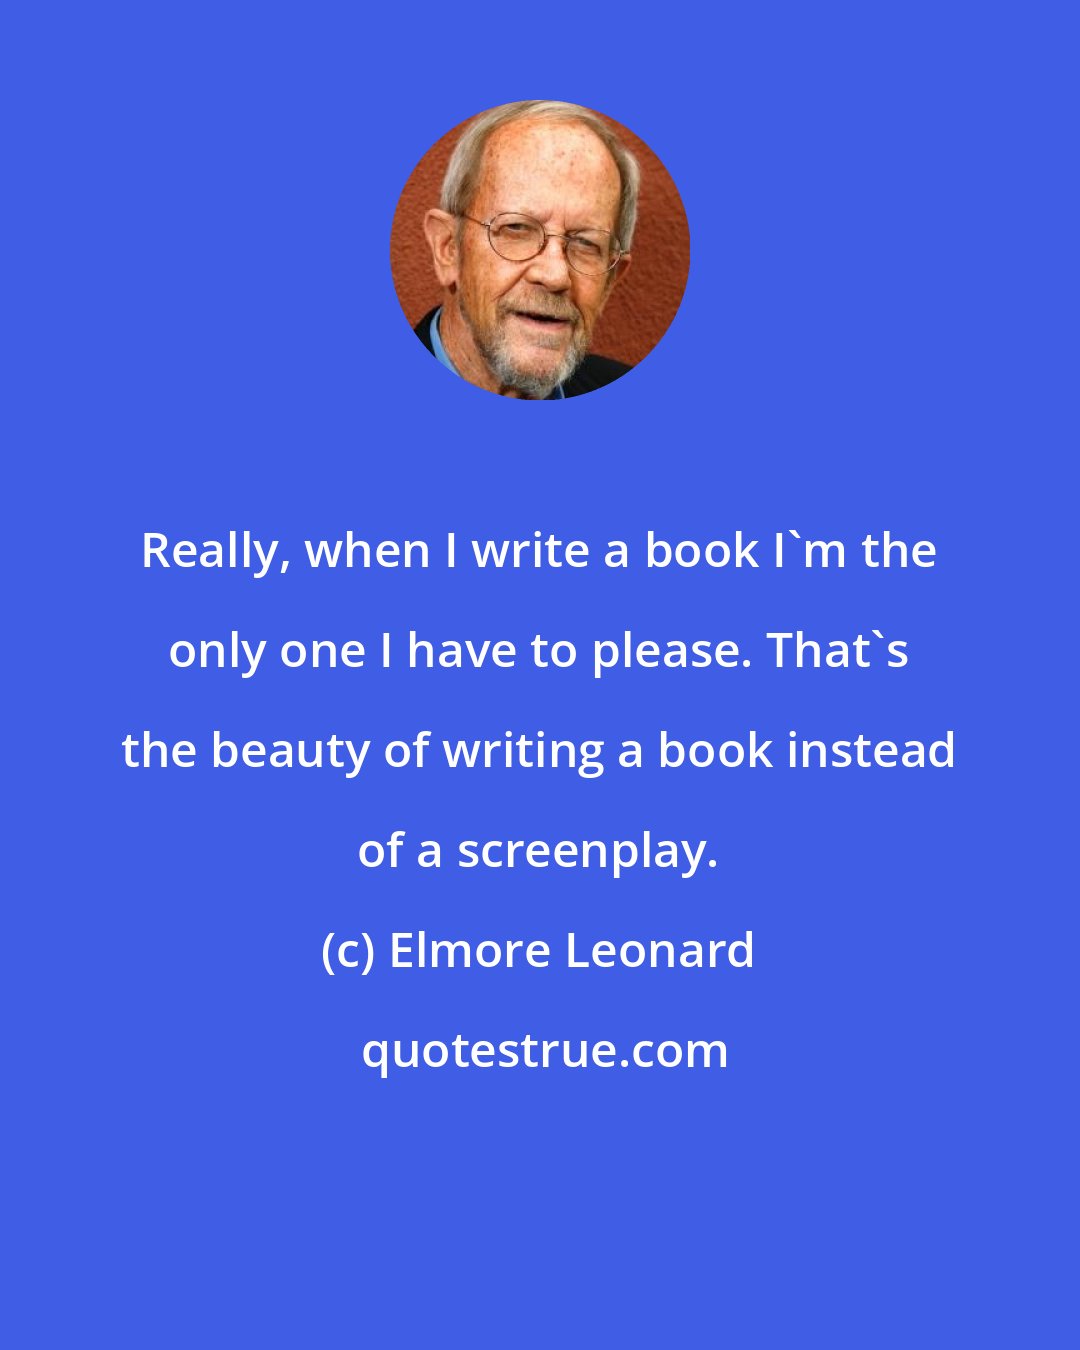 Elmore Leonard: Really, when I write a book I'm the only one I have to please. That's the beauty of writing a book instead of a screenplay.